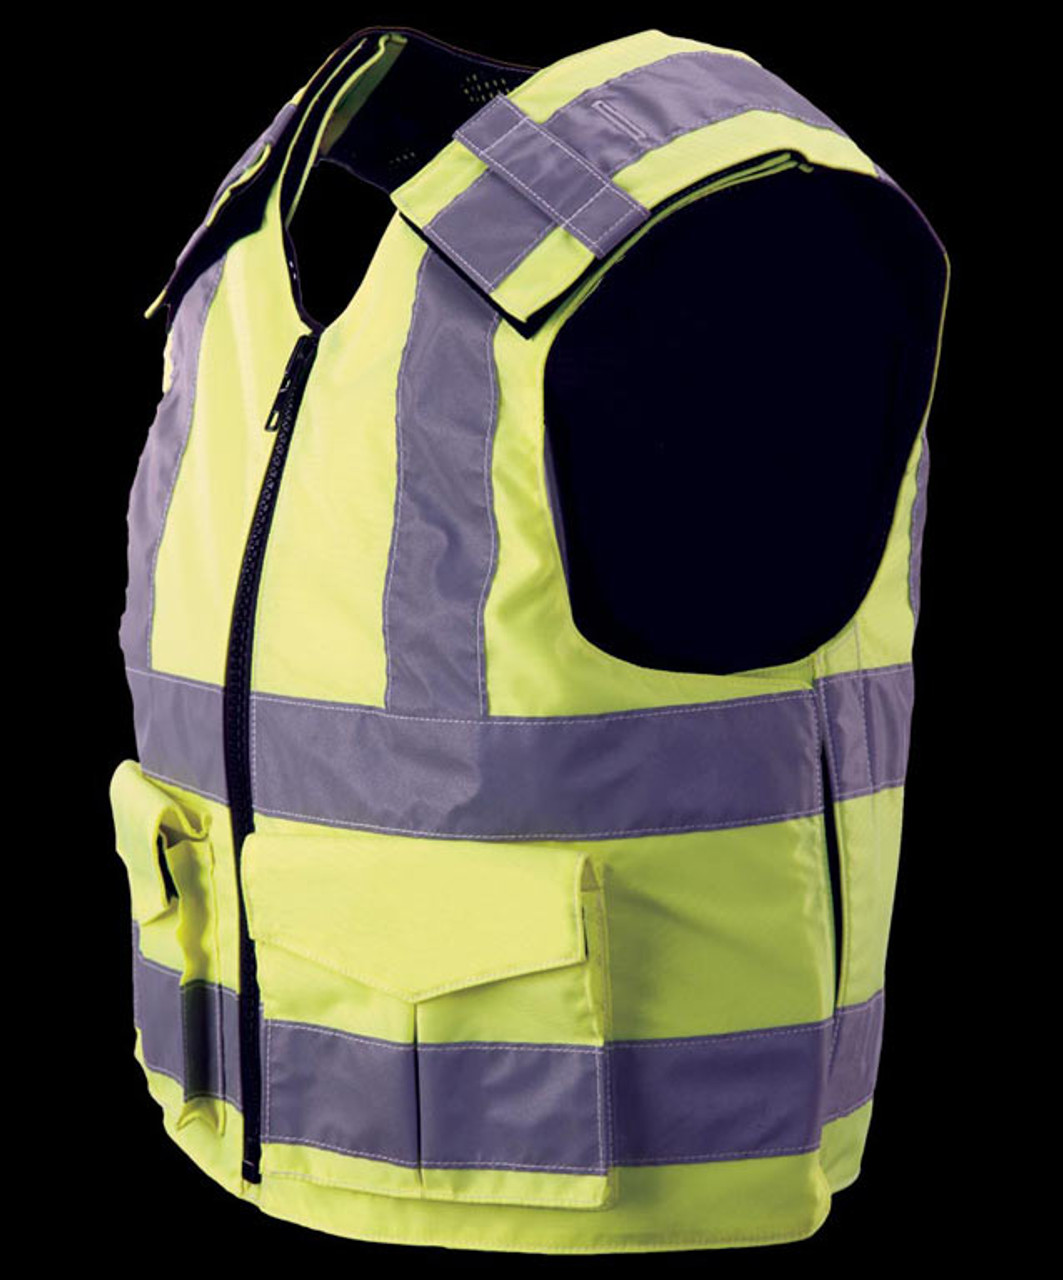 Point Blank Hi-Vis Front Opening Carrier Body Armor Vest, For Military and Police, Available with NIJ .06 Level II, IIA and IIIA Ballistic Systems